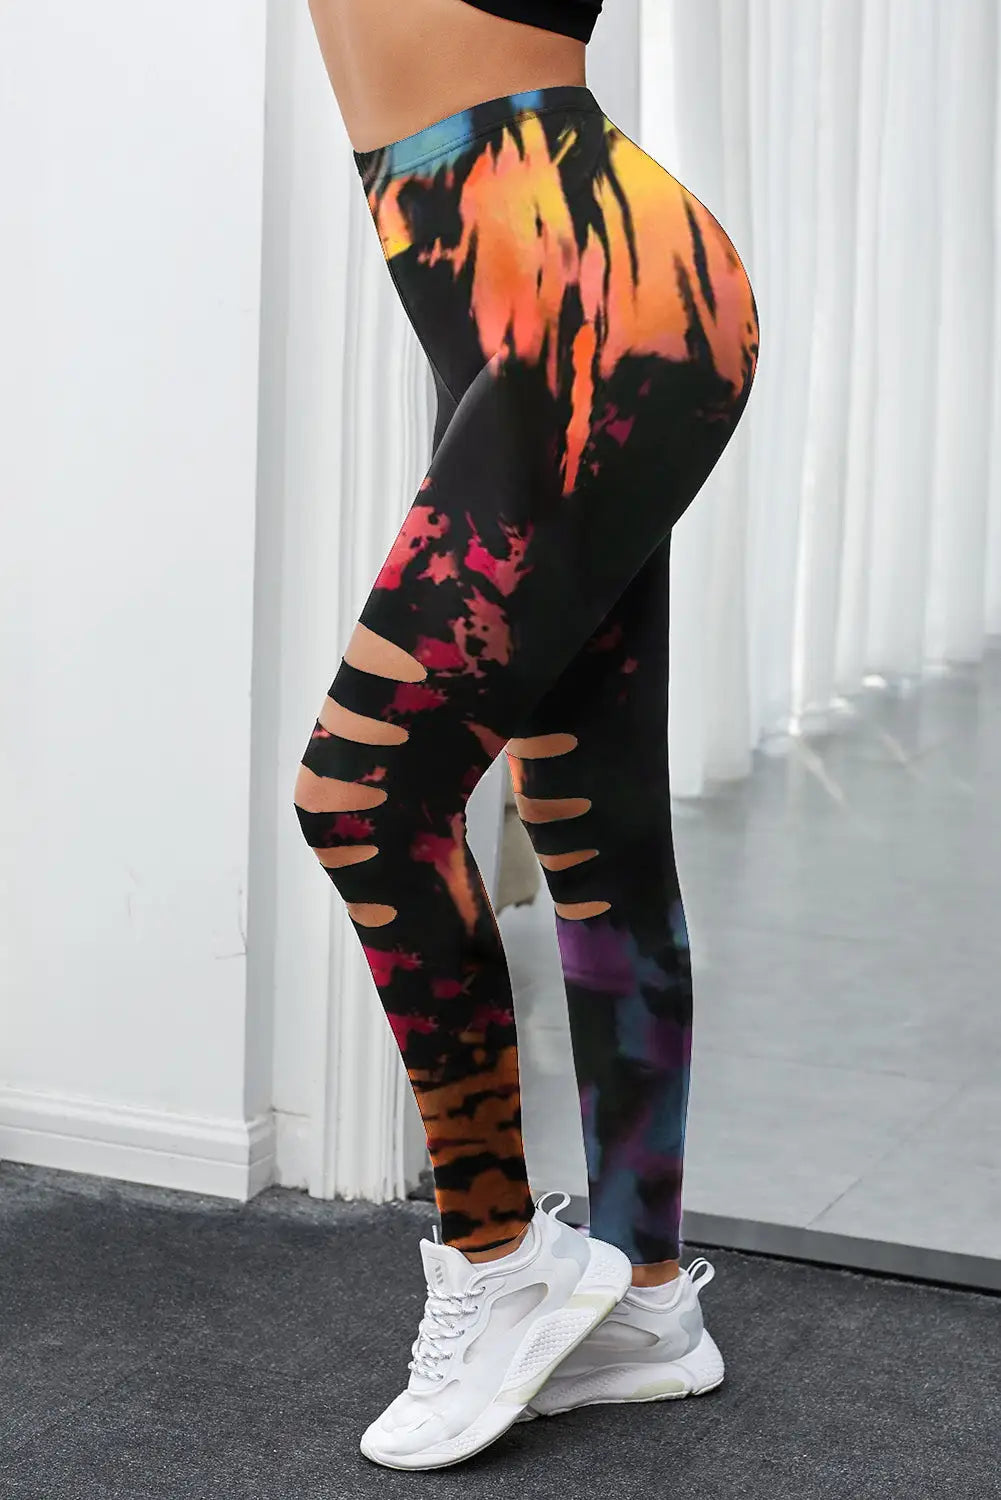 Pink tie dye hollow out fitness activewear leggings